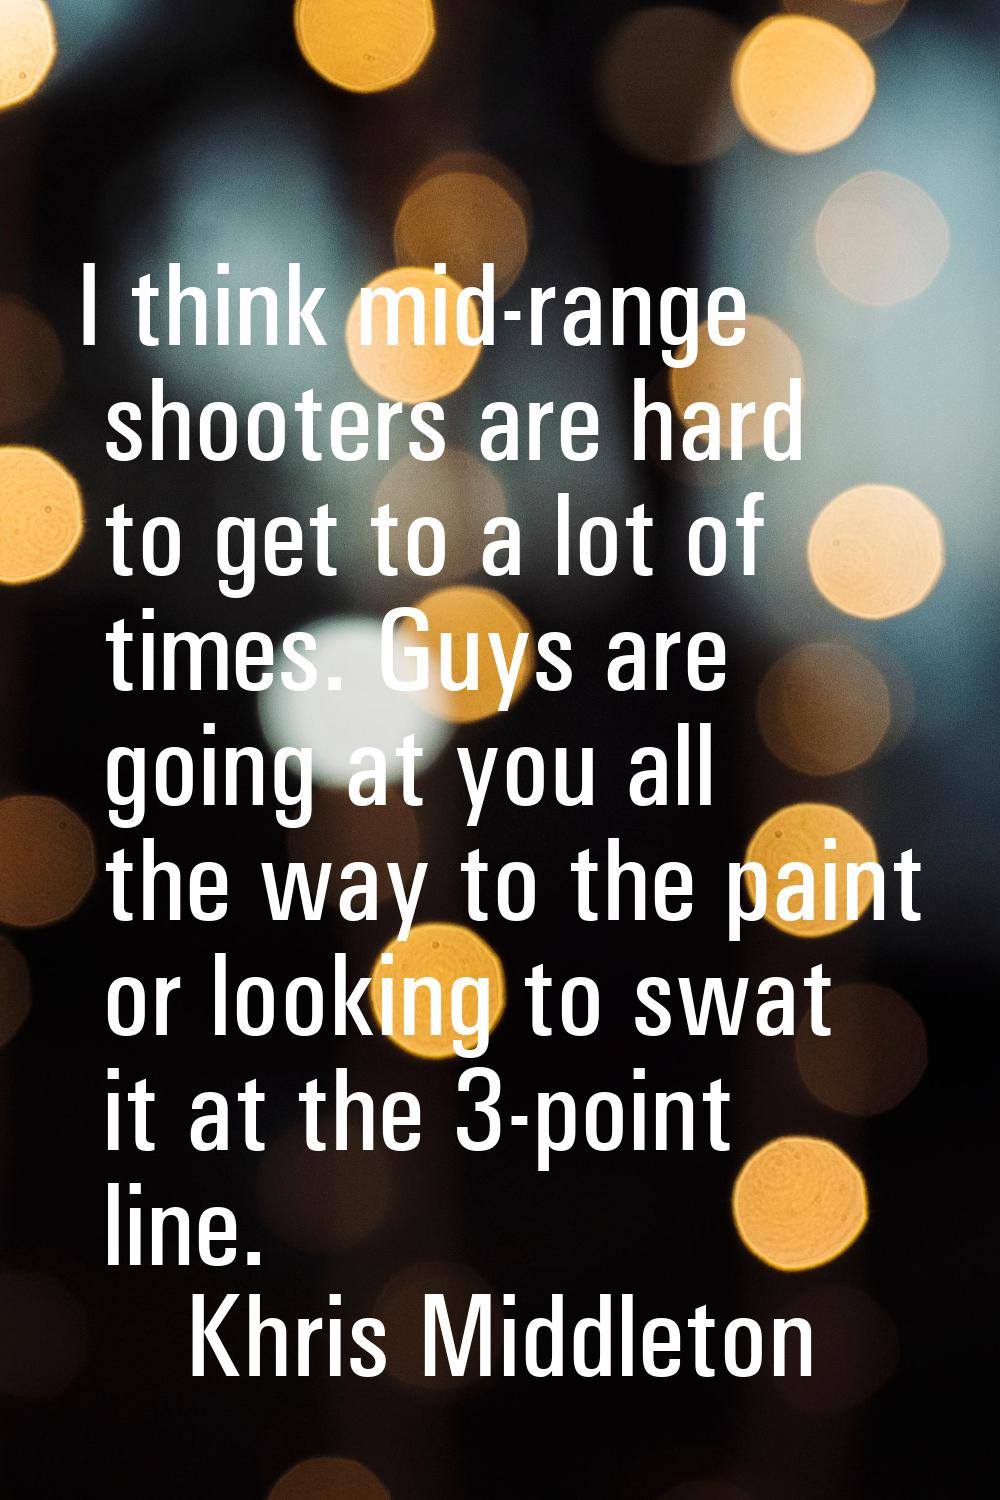 I think mid-range shooters are hard to get to a lot of times. Guys are going at you all the way to 